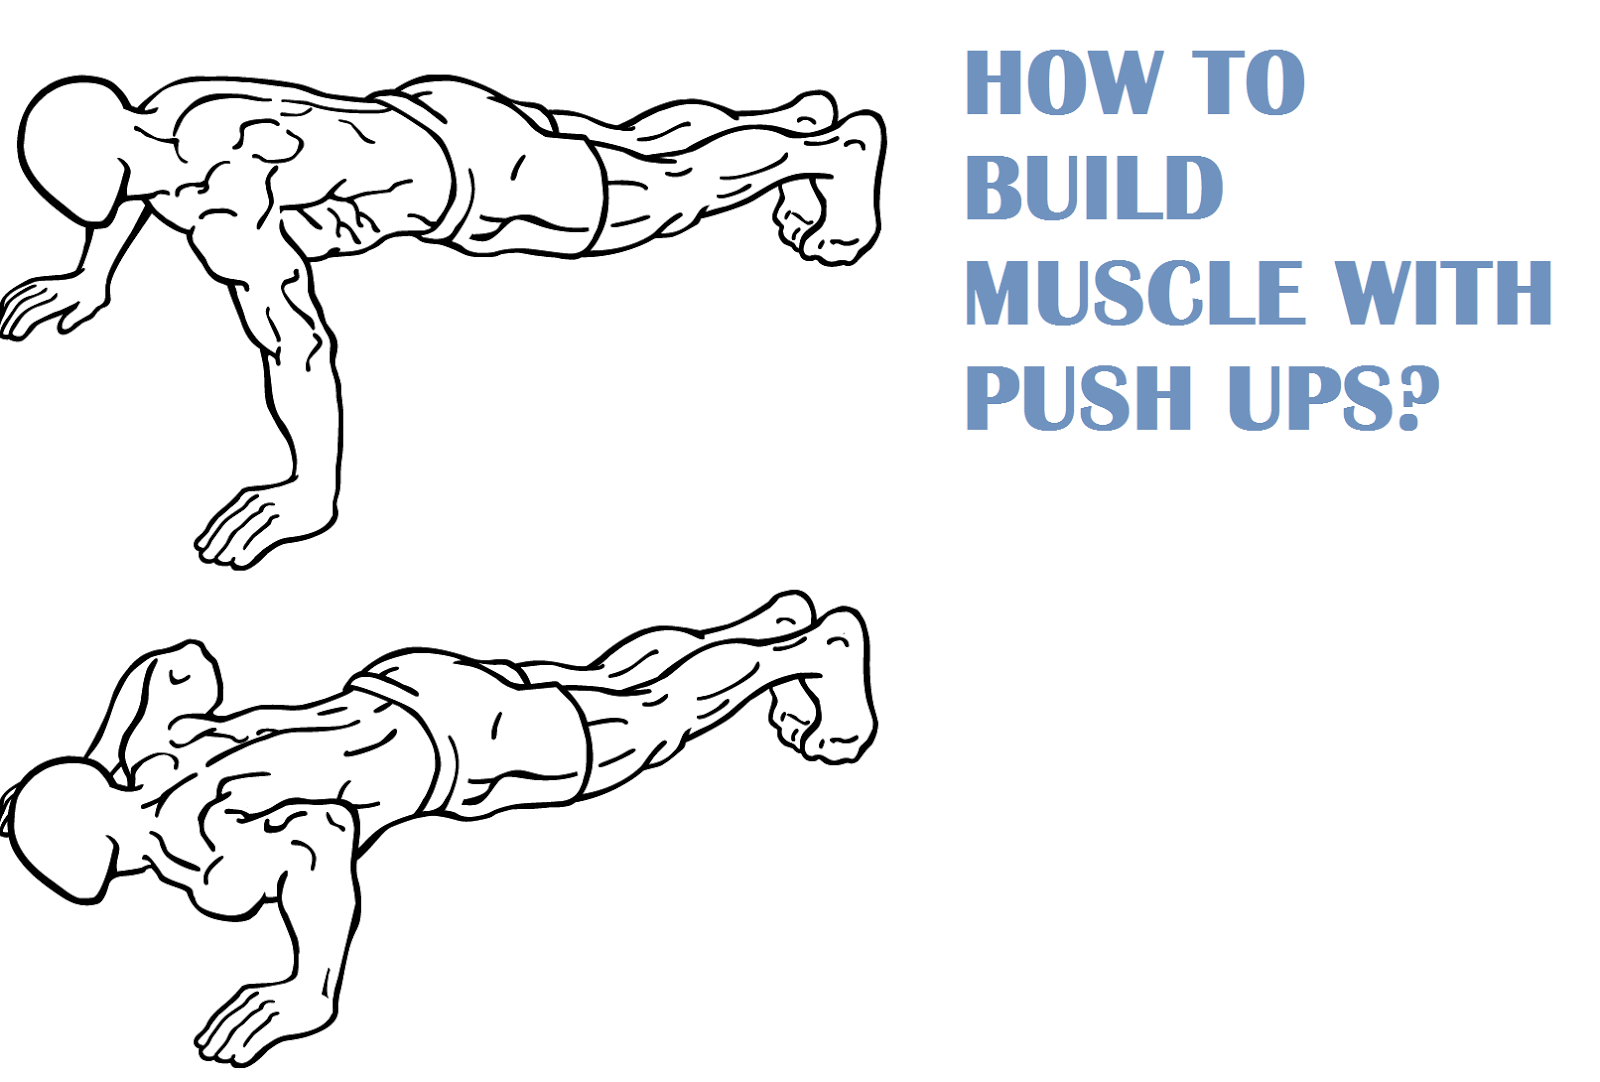 How to Build Muscle with Push Ups? 